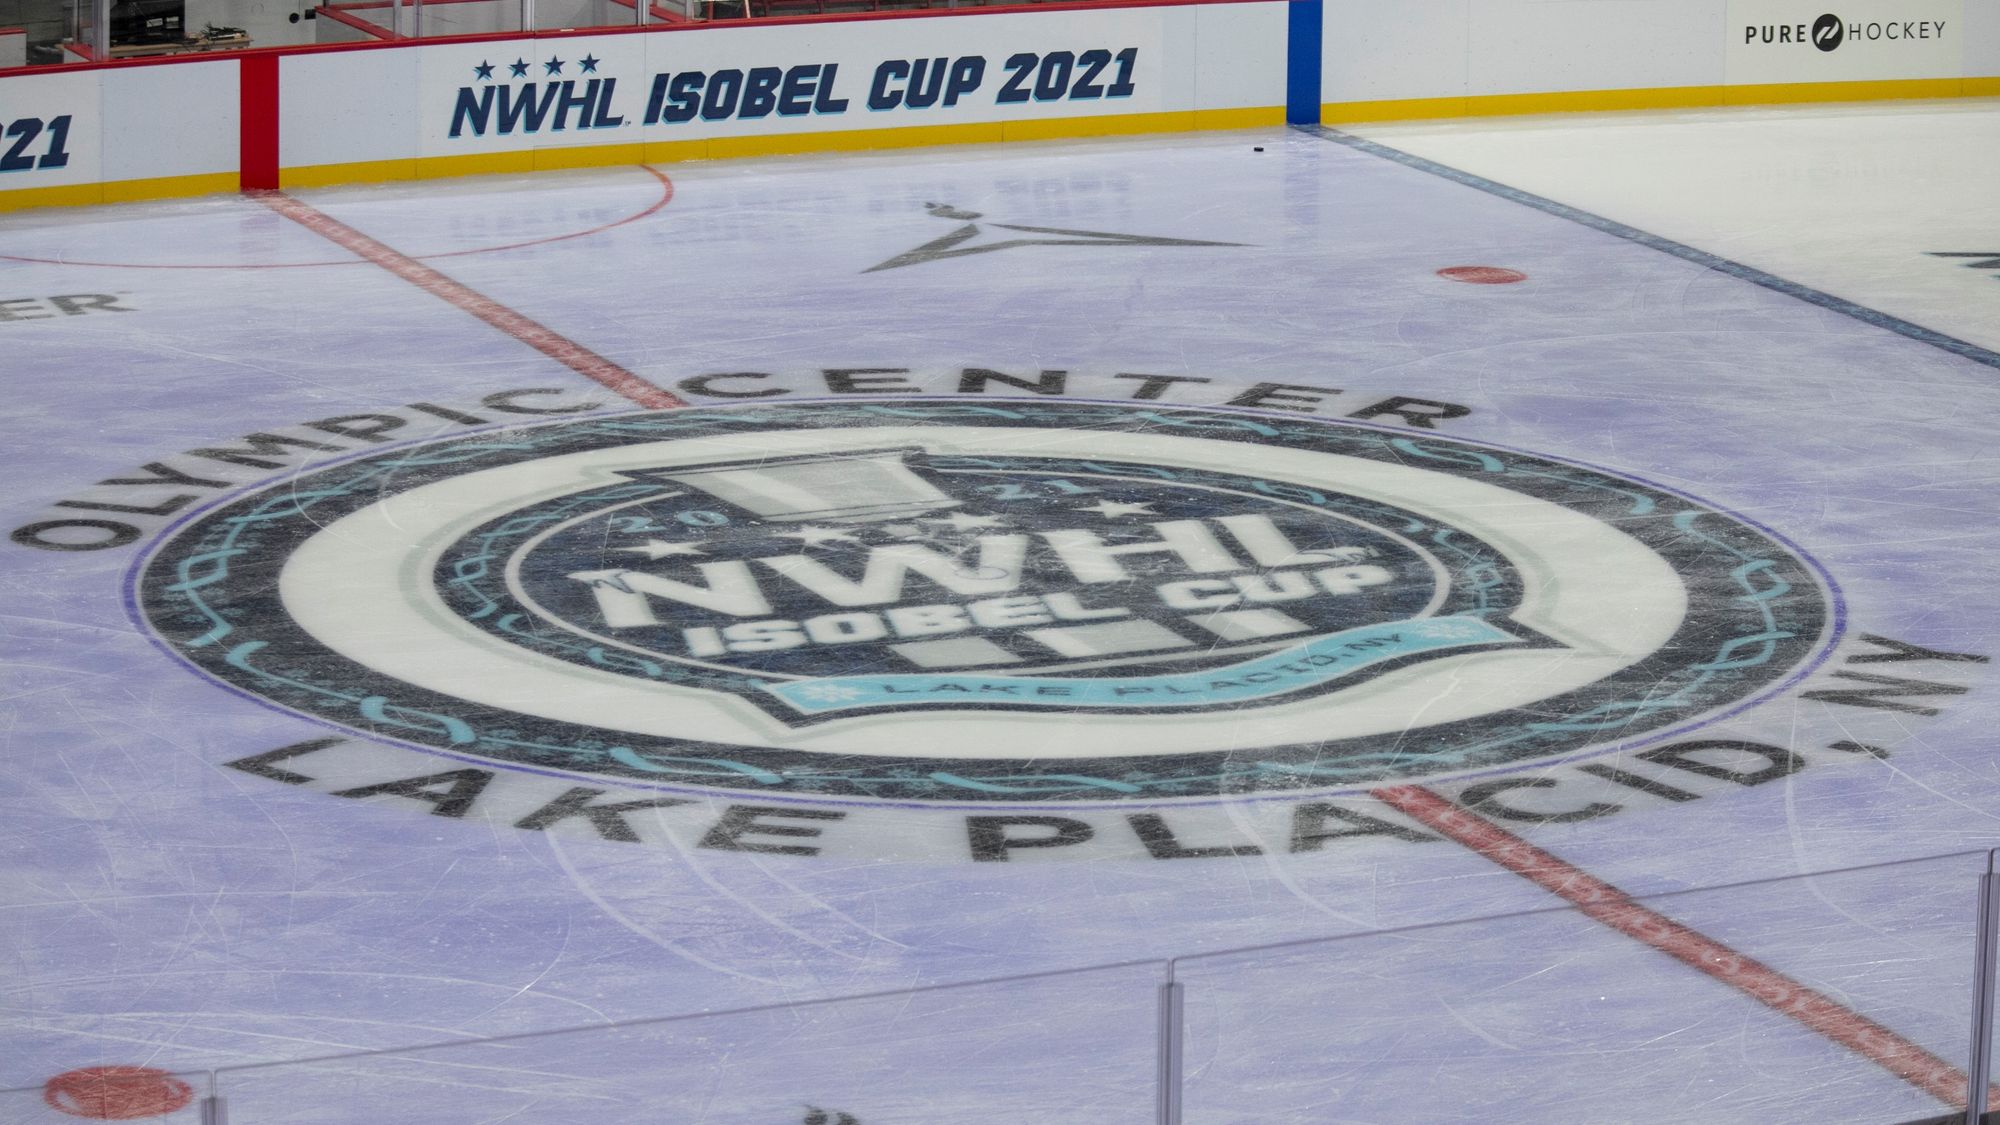 US-Based Ownership Group Pursuing NWHL Expansion to Montreal